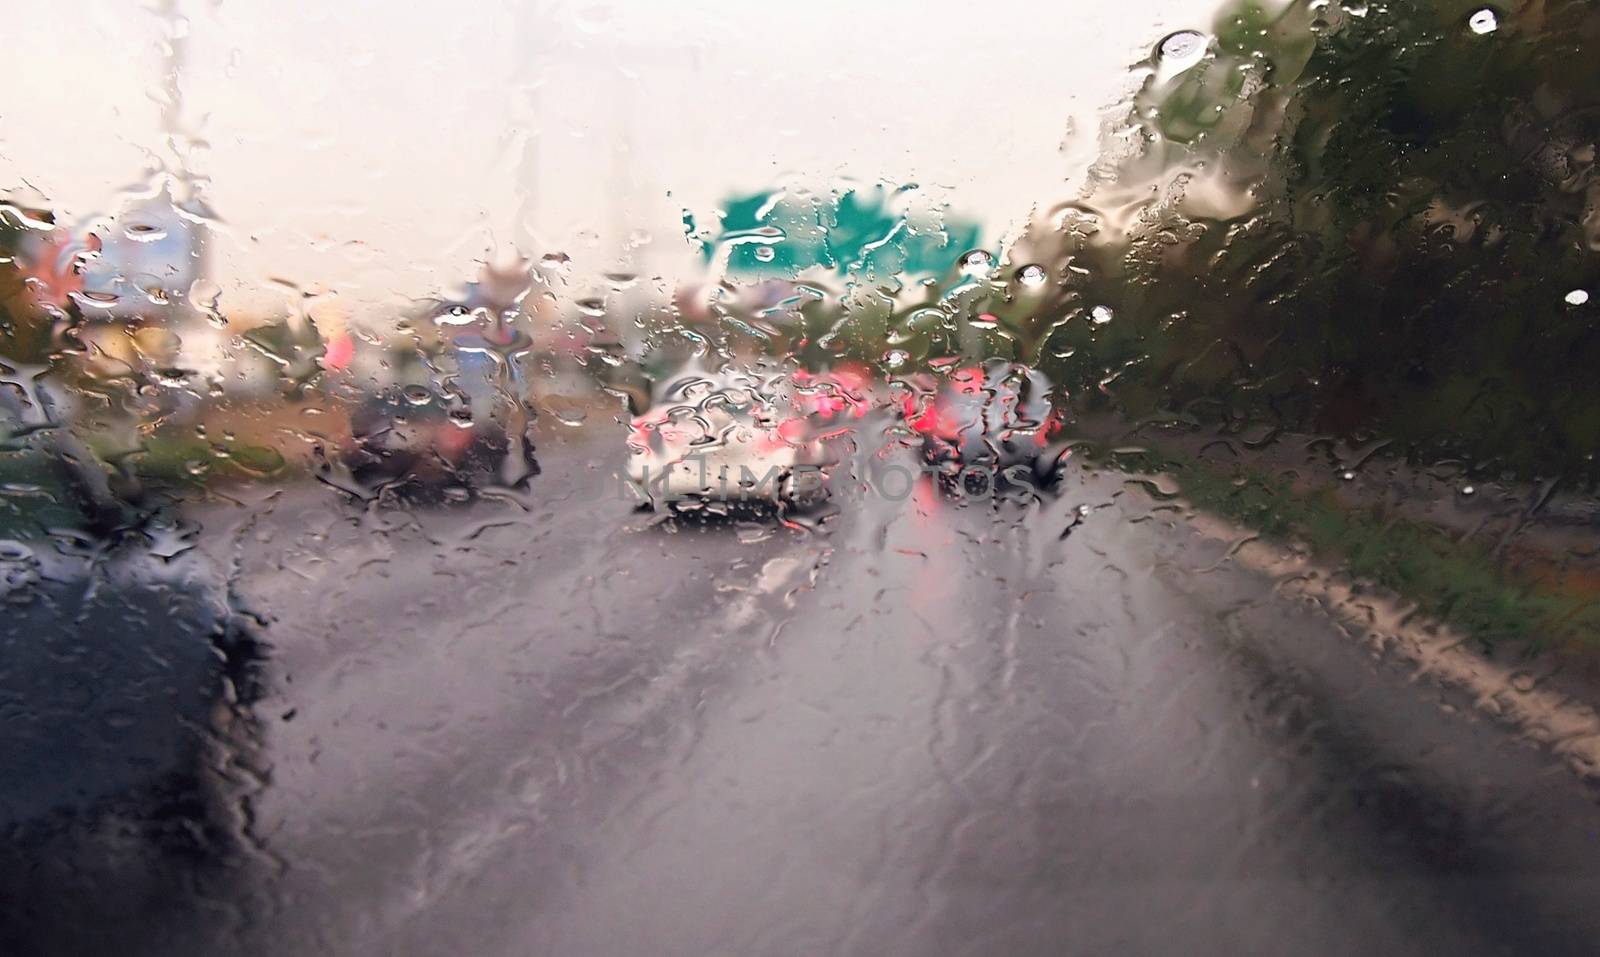 Driving a car in the rain and storm in heavy traffic. View through a windshield with rain drops during driving a car. Shallow depth of field.